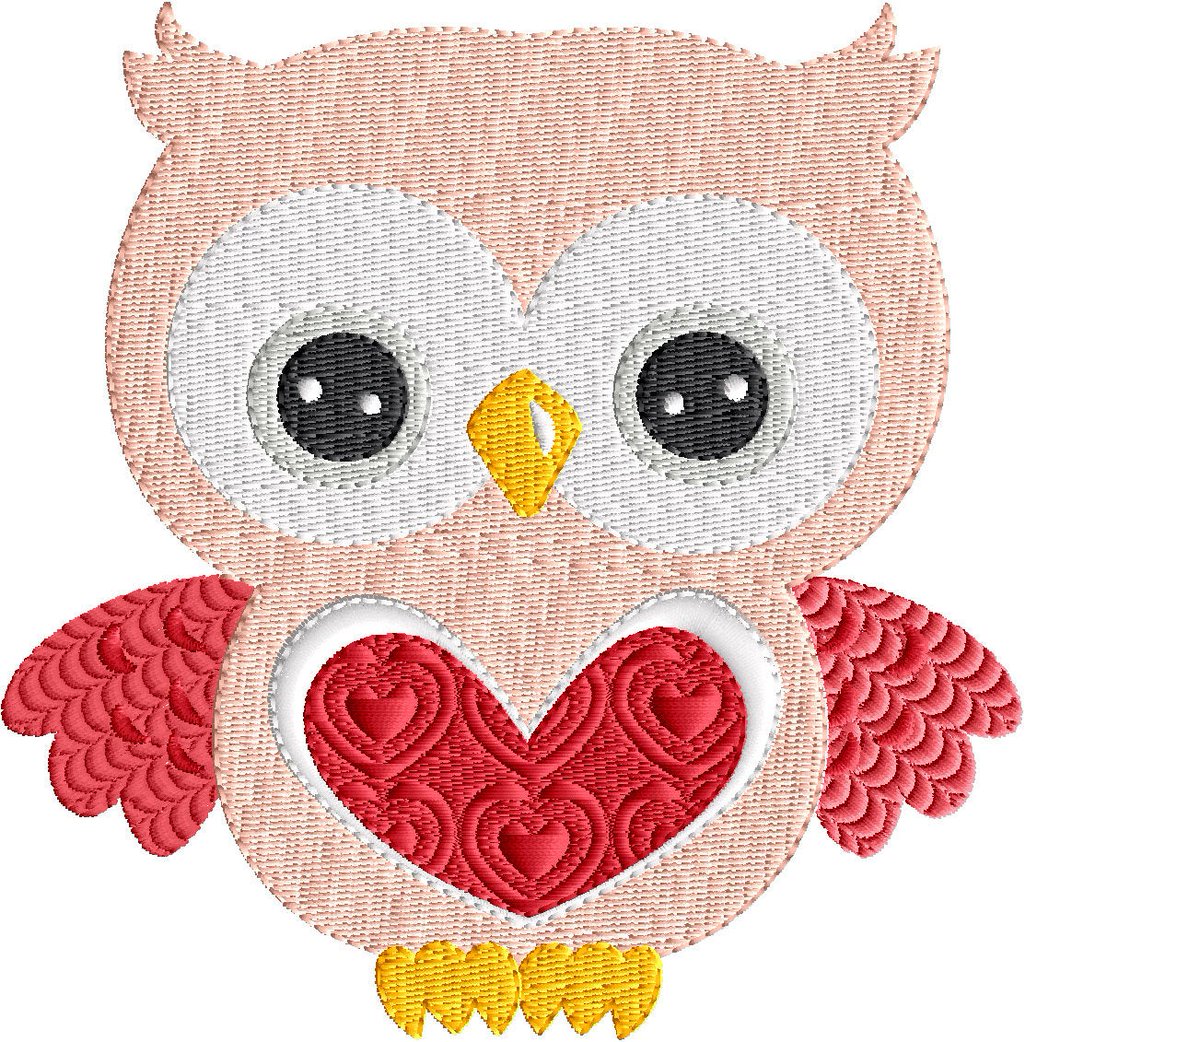 Thanks for the great review chelsea p. ★★★★★! etsy.me/2BgKZCU #etsy #supplies #pink #kidscrafts #red #owlembroidery #embroiderydesign #owl #machineembroidery #embroidery